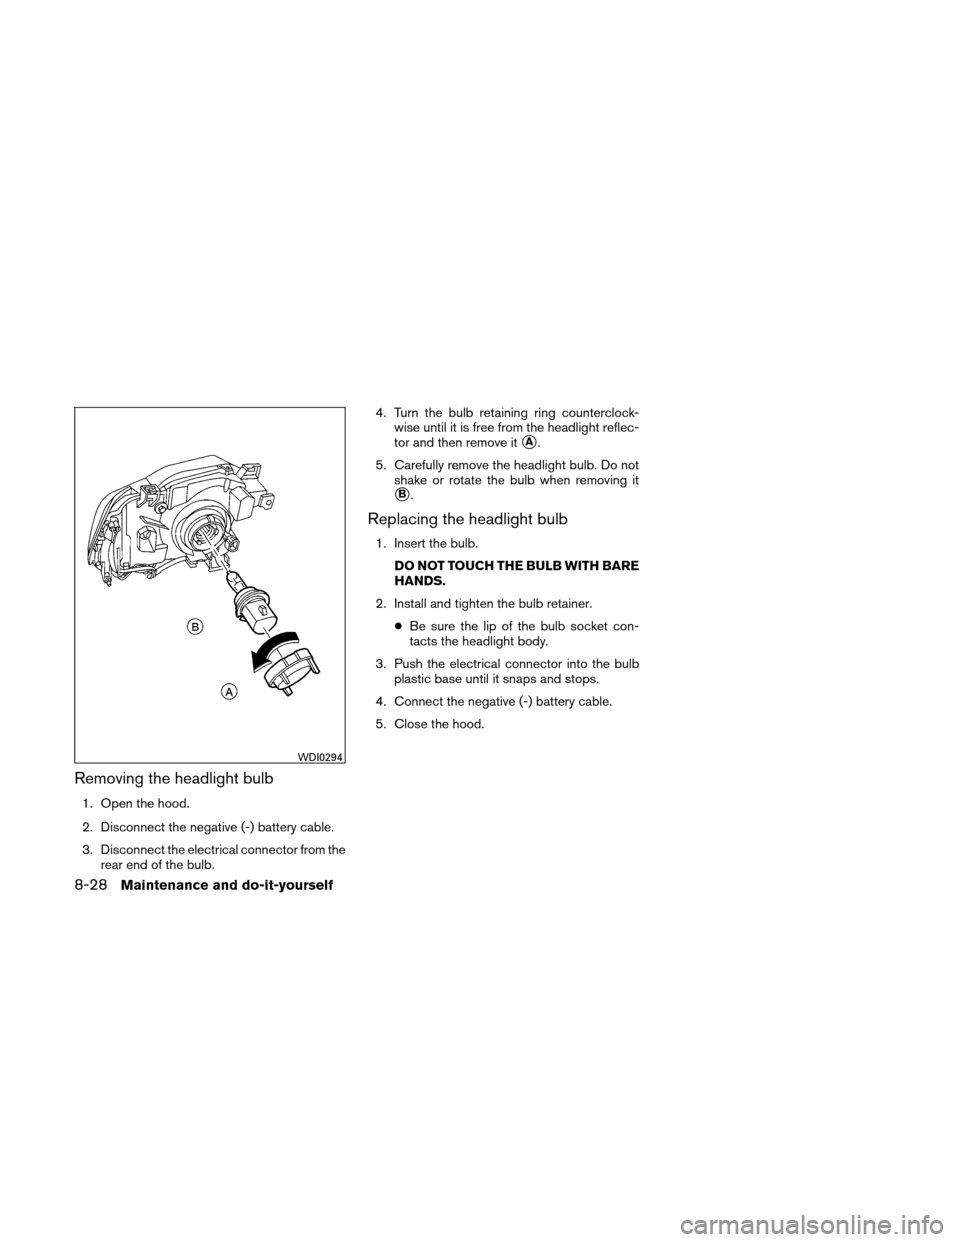 NISSAN XTERRA 2011 N50 / 2.G Service Manual Removing the headlight bulb
1. Open the hood.
2. Disconnect the negative (-) battery cable.
3. Disconnect the electrical connector from therear end of the bulb. 4. Turn the bulb retaining ring counter